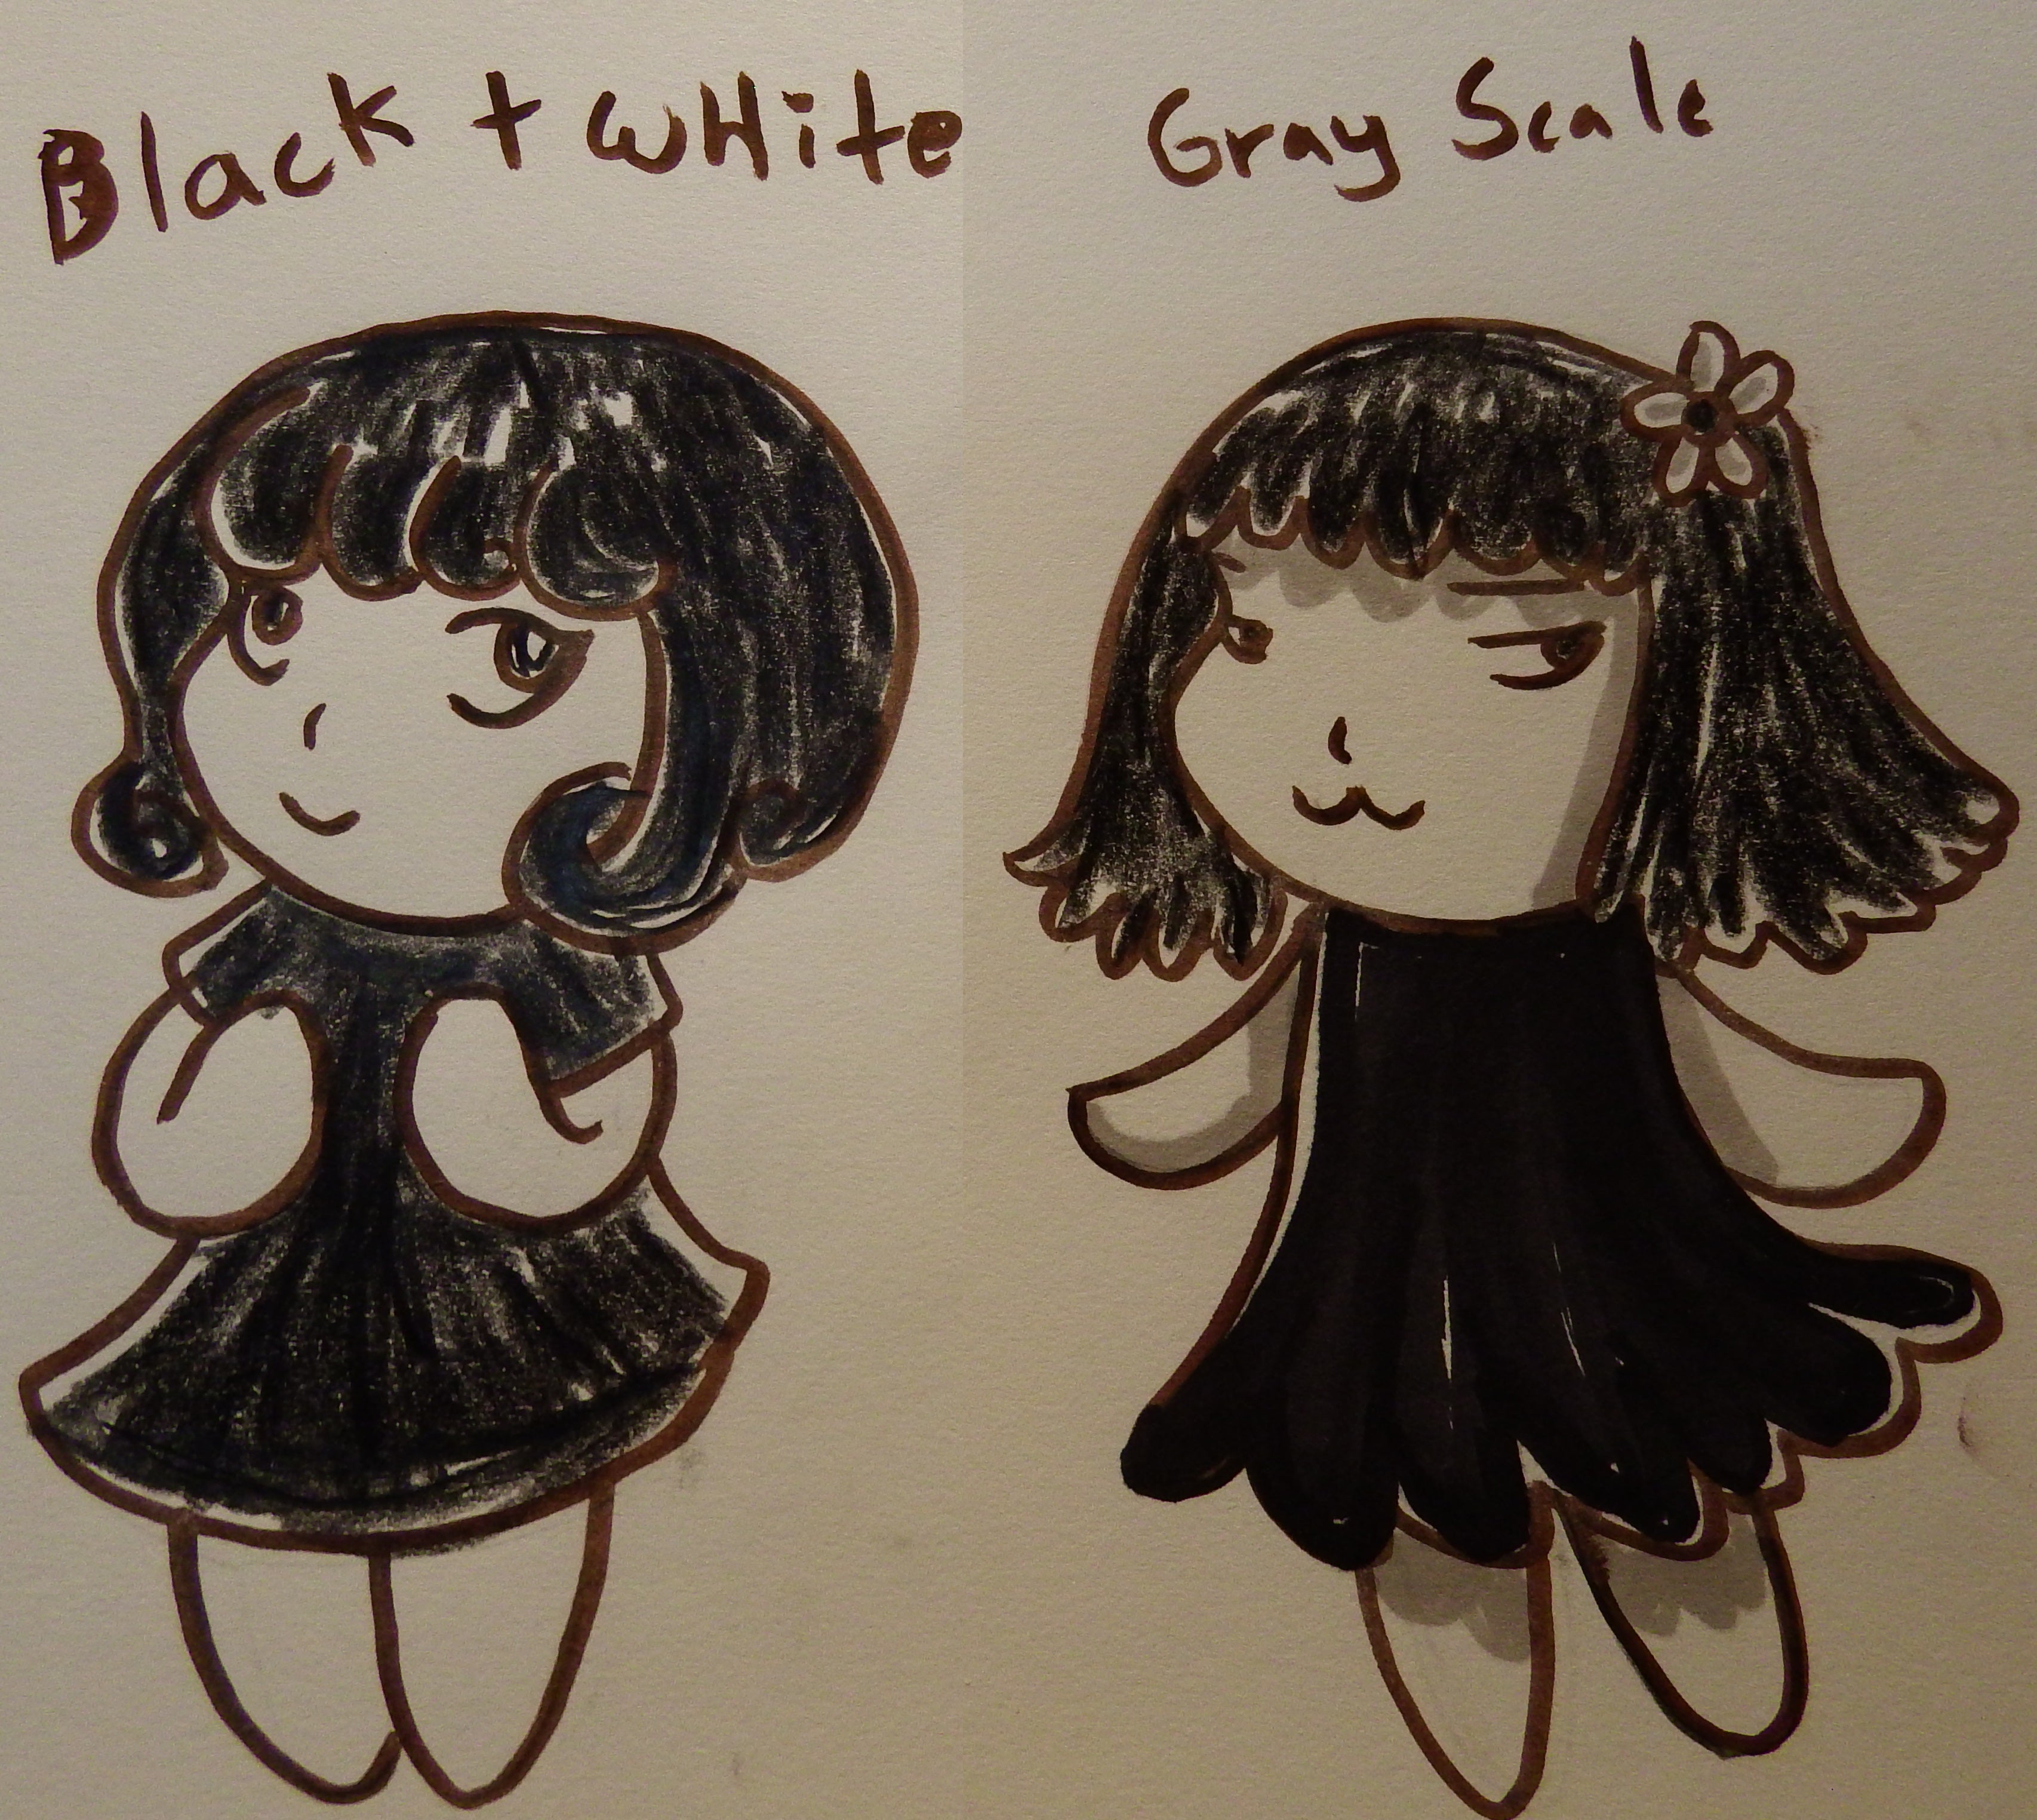 color theory, black and white vs grayscale, artsy sister